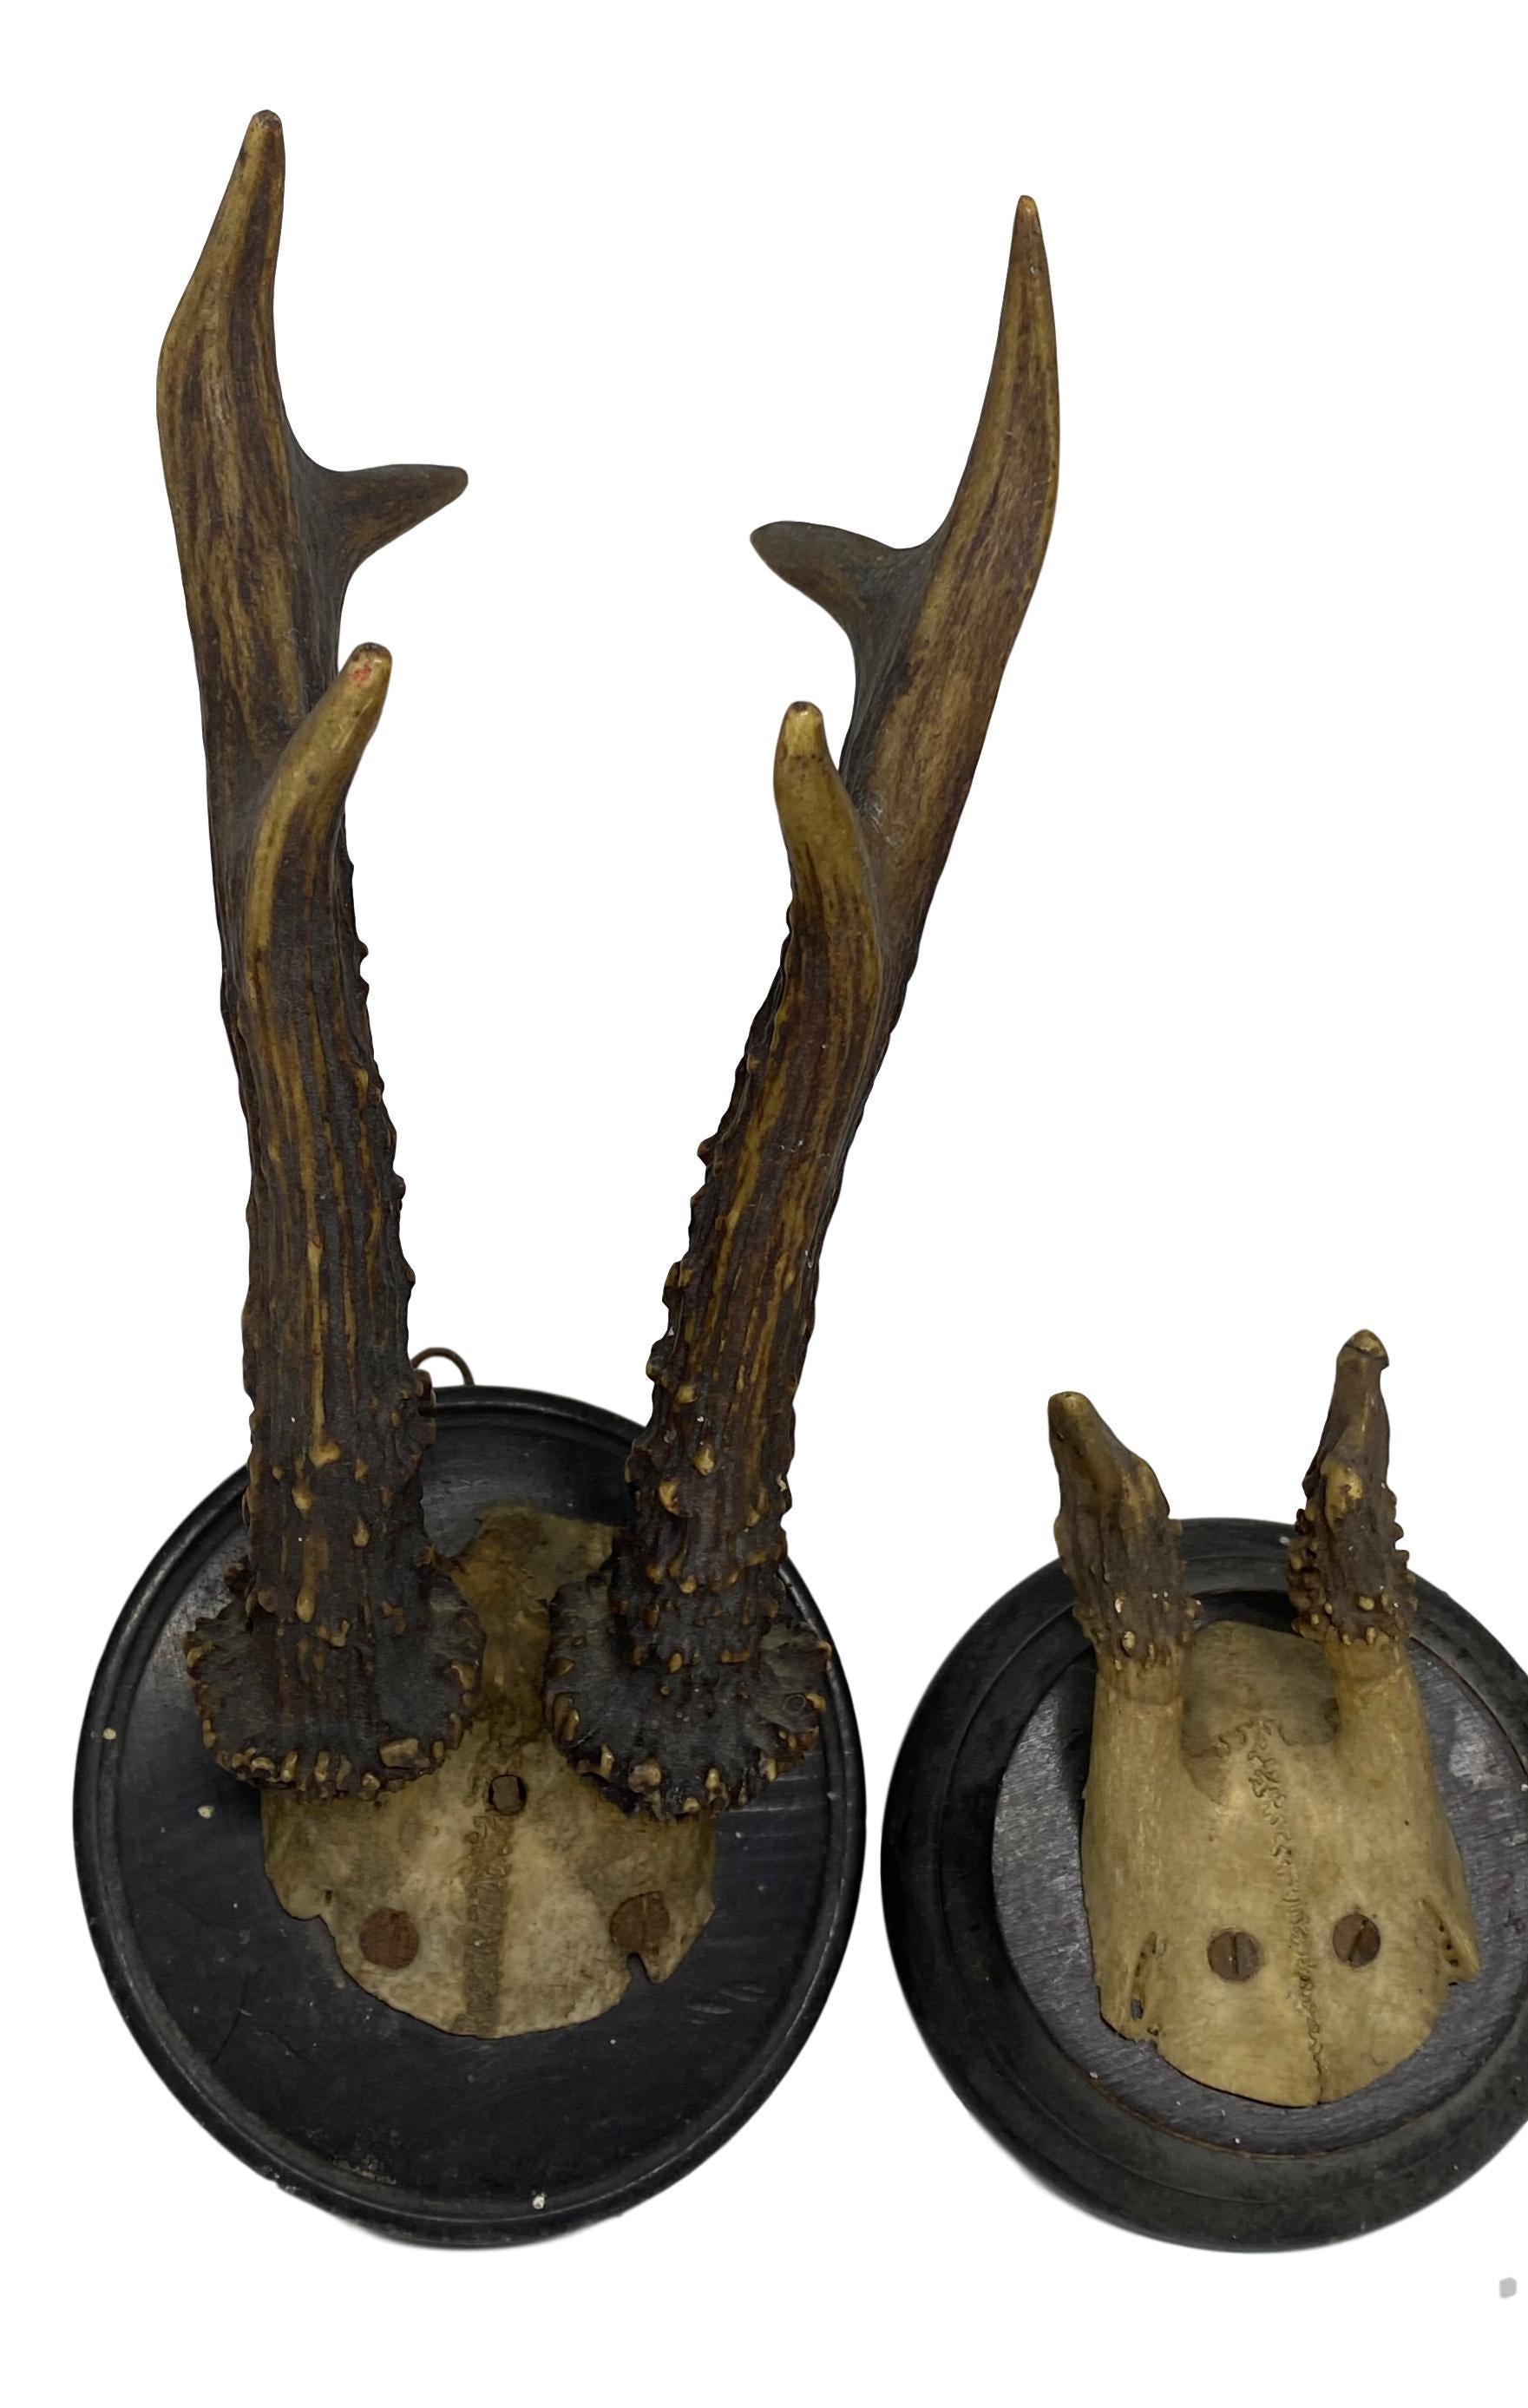 A set of three antique Black Forest deer antler trophies on hand carved, black lacquered wooden plaques. They are from the 1890s or older. Measures: Tallest is approximate 10 1/4